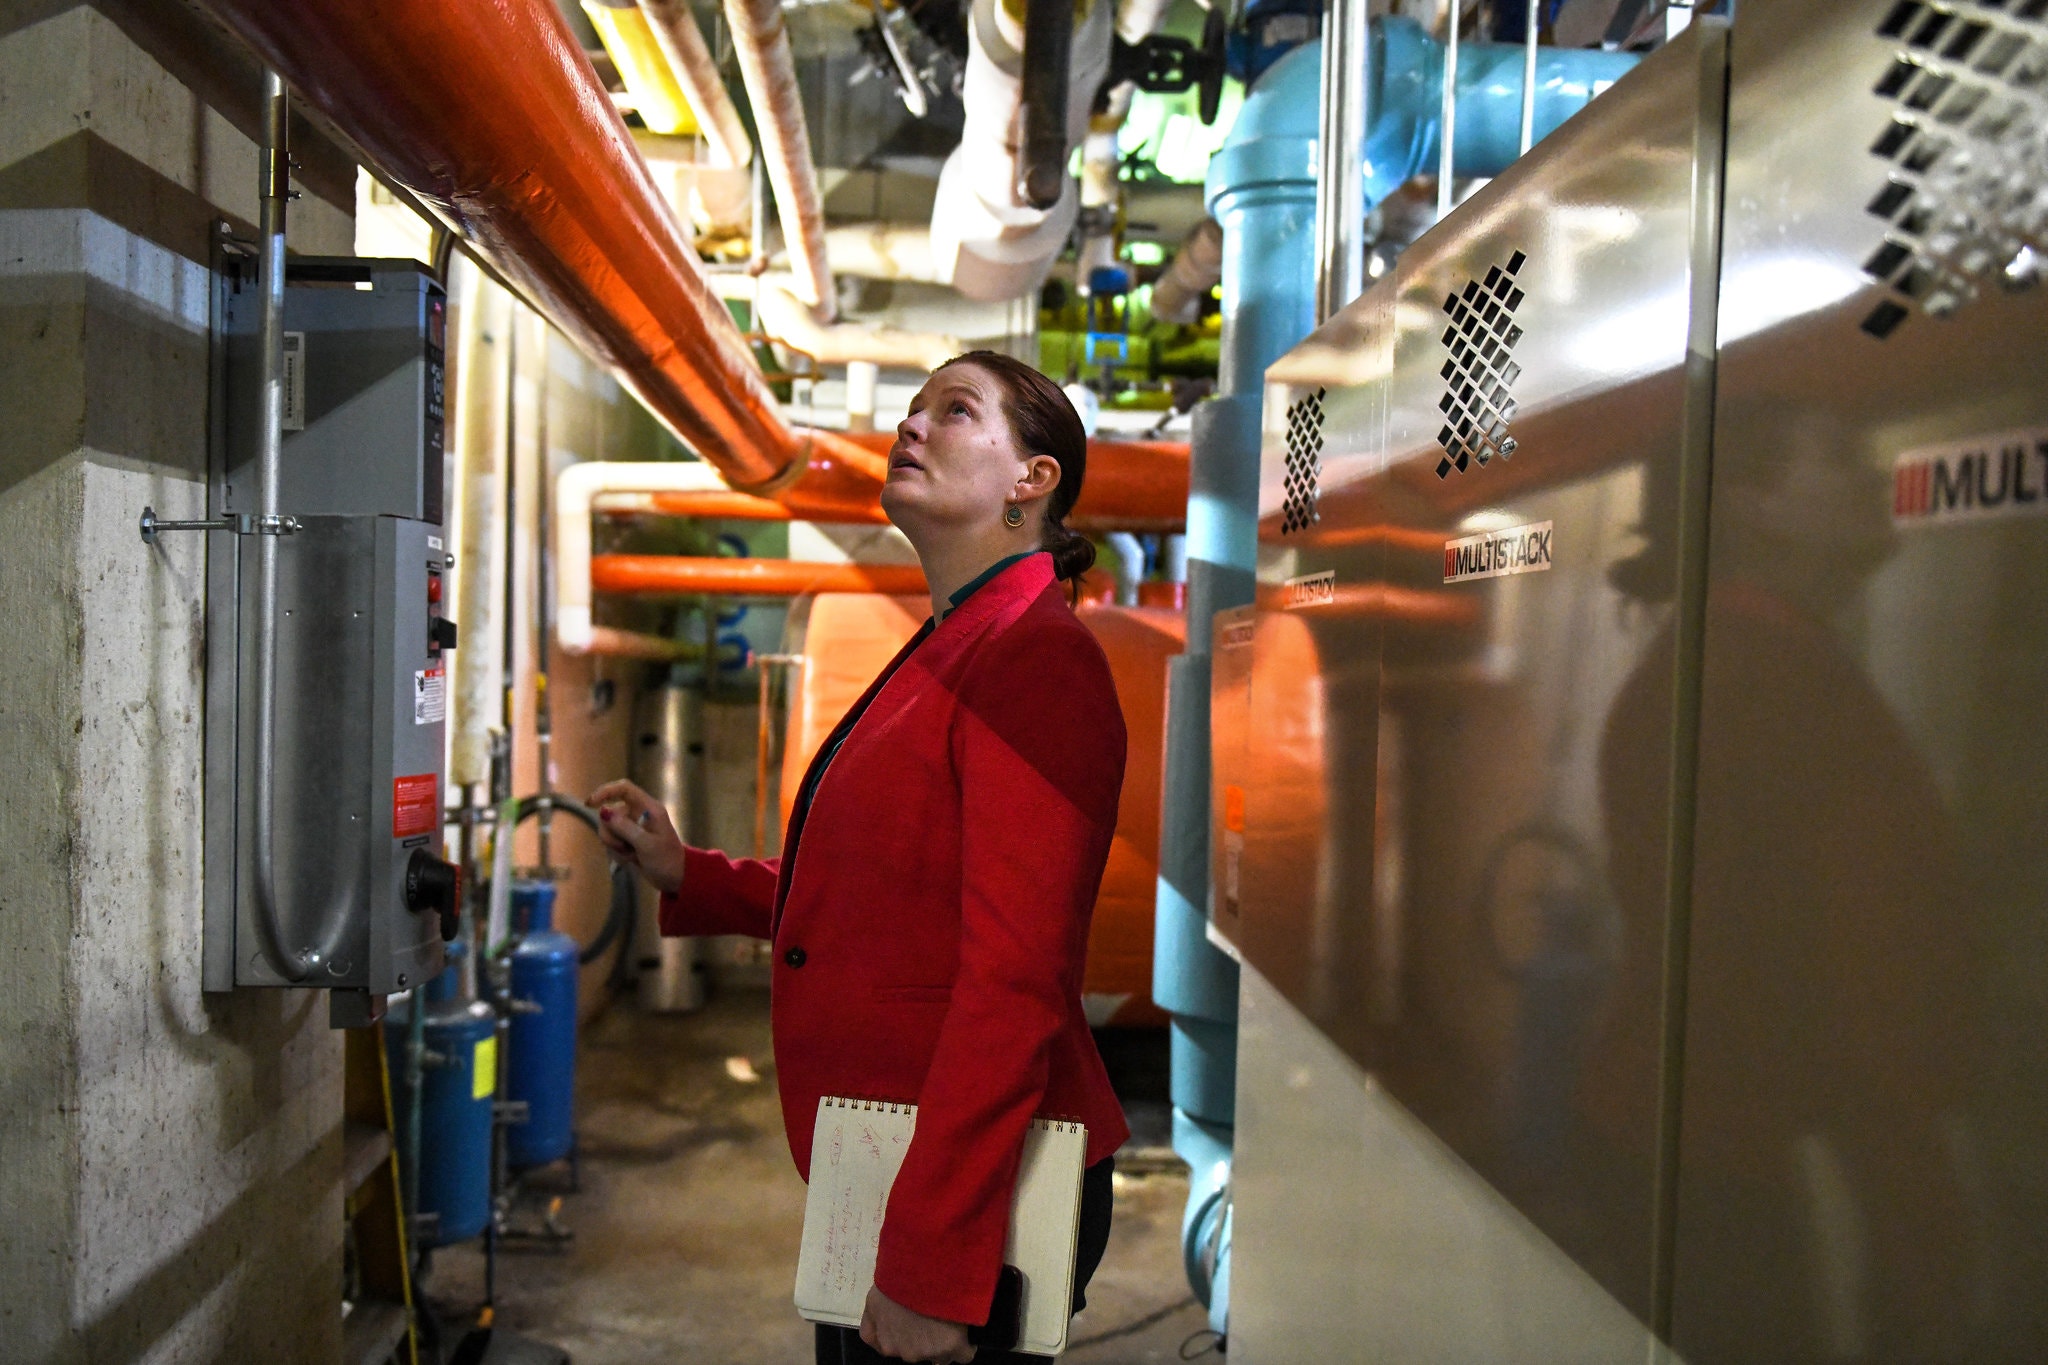 Kelly Dougherty inspects the energy-efficiency of a building in Midtown Manhattan.Credit...Desiree Rios for The New York Times